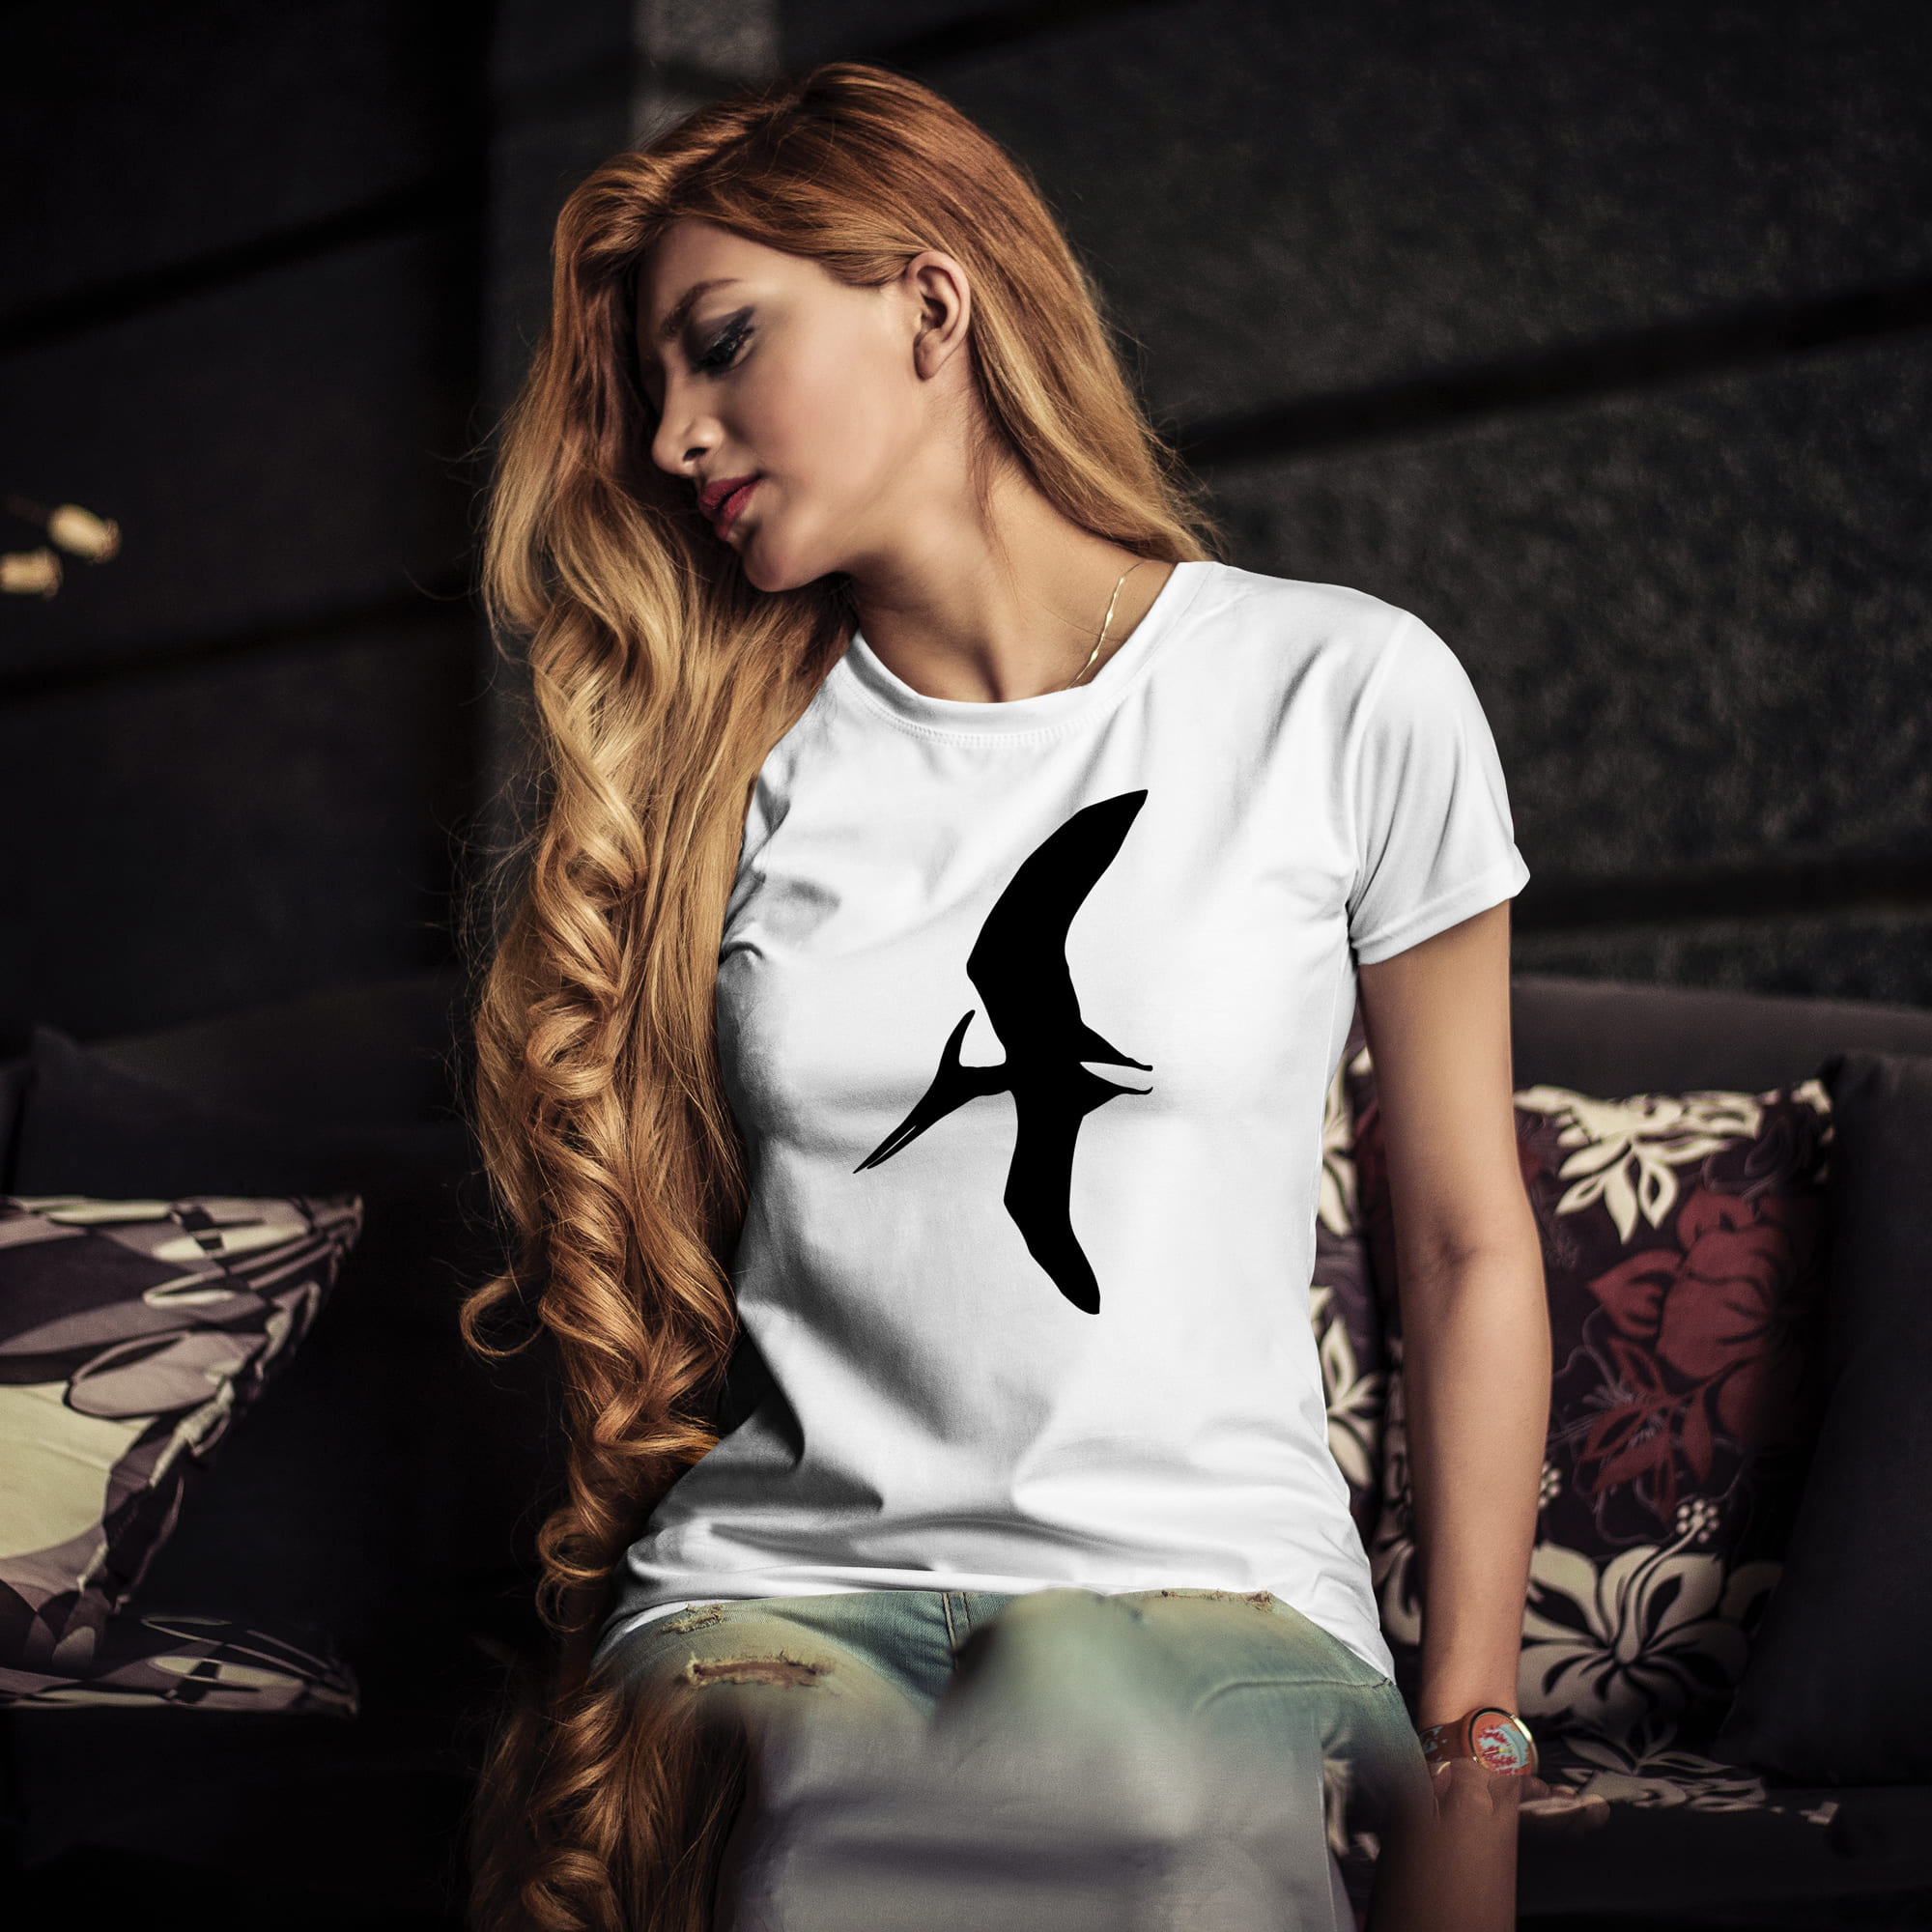 Woman sitting on a couch wearing a t - shirt with a bird on it.